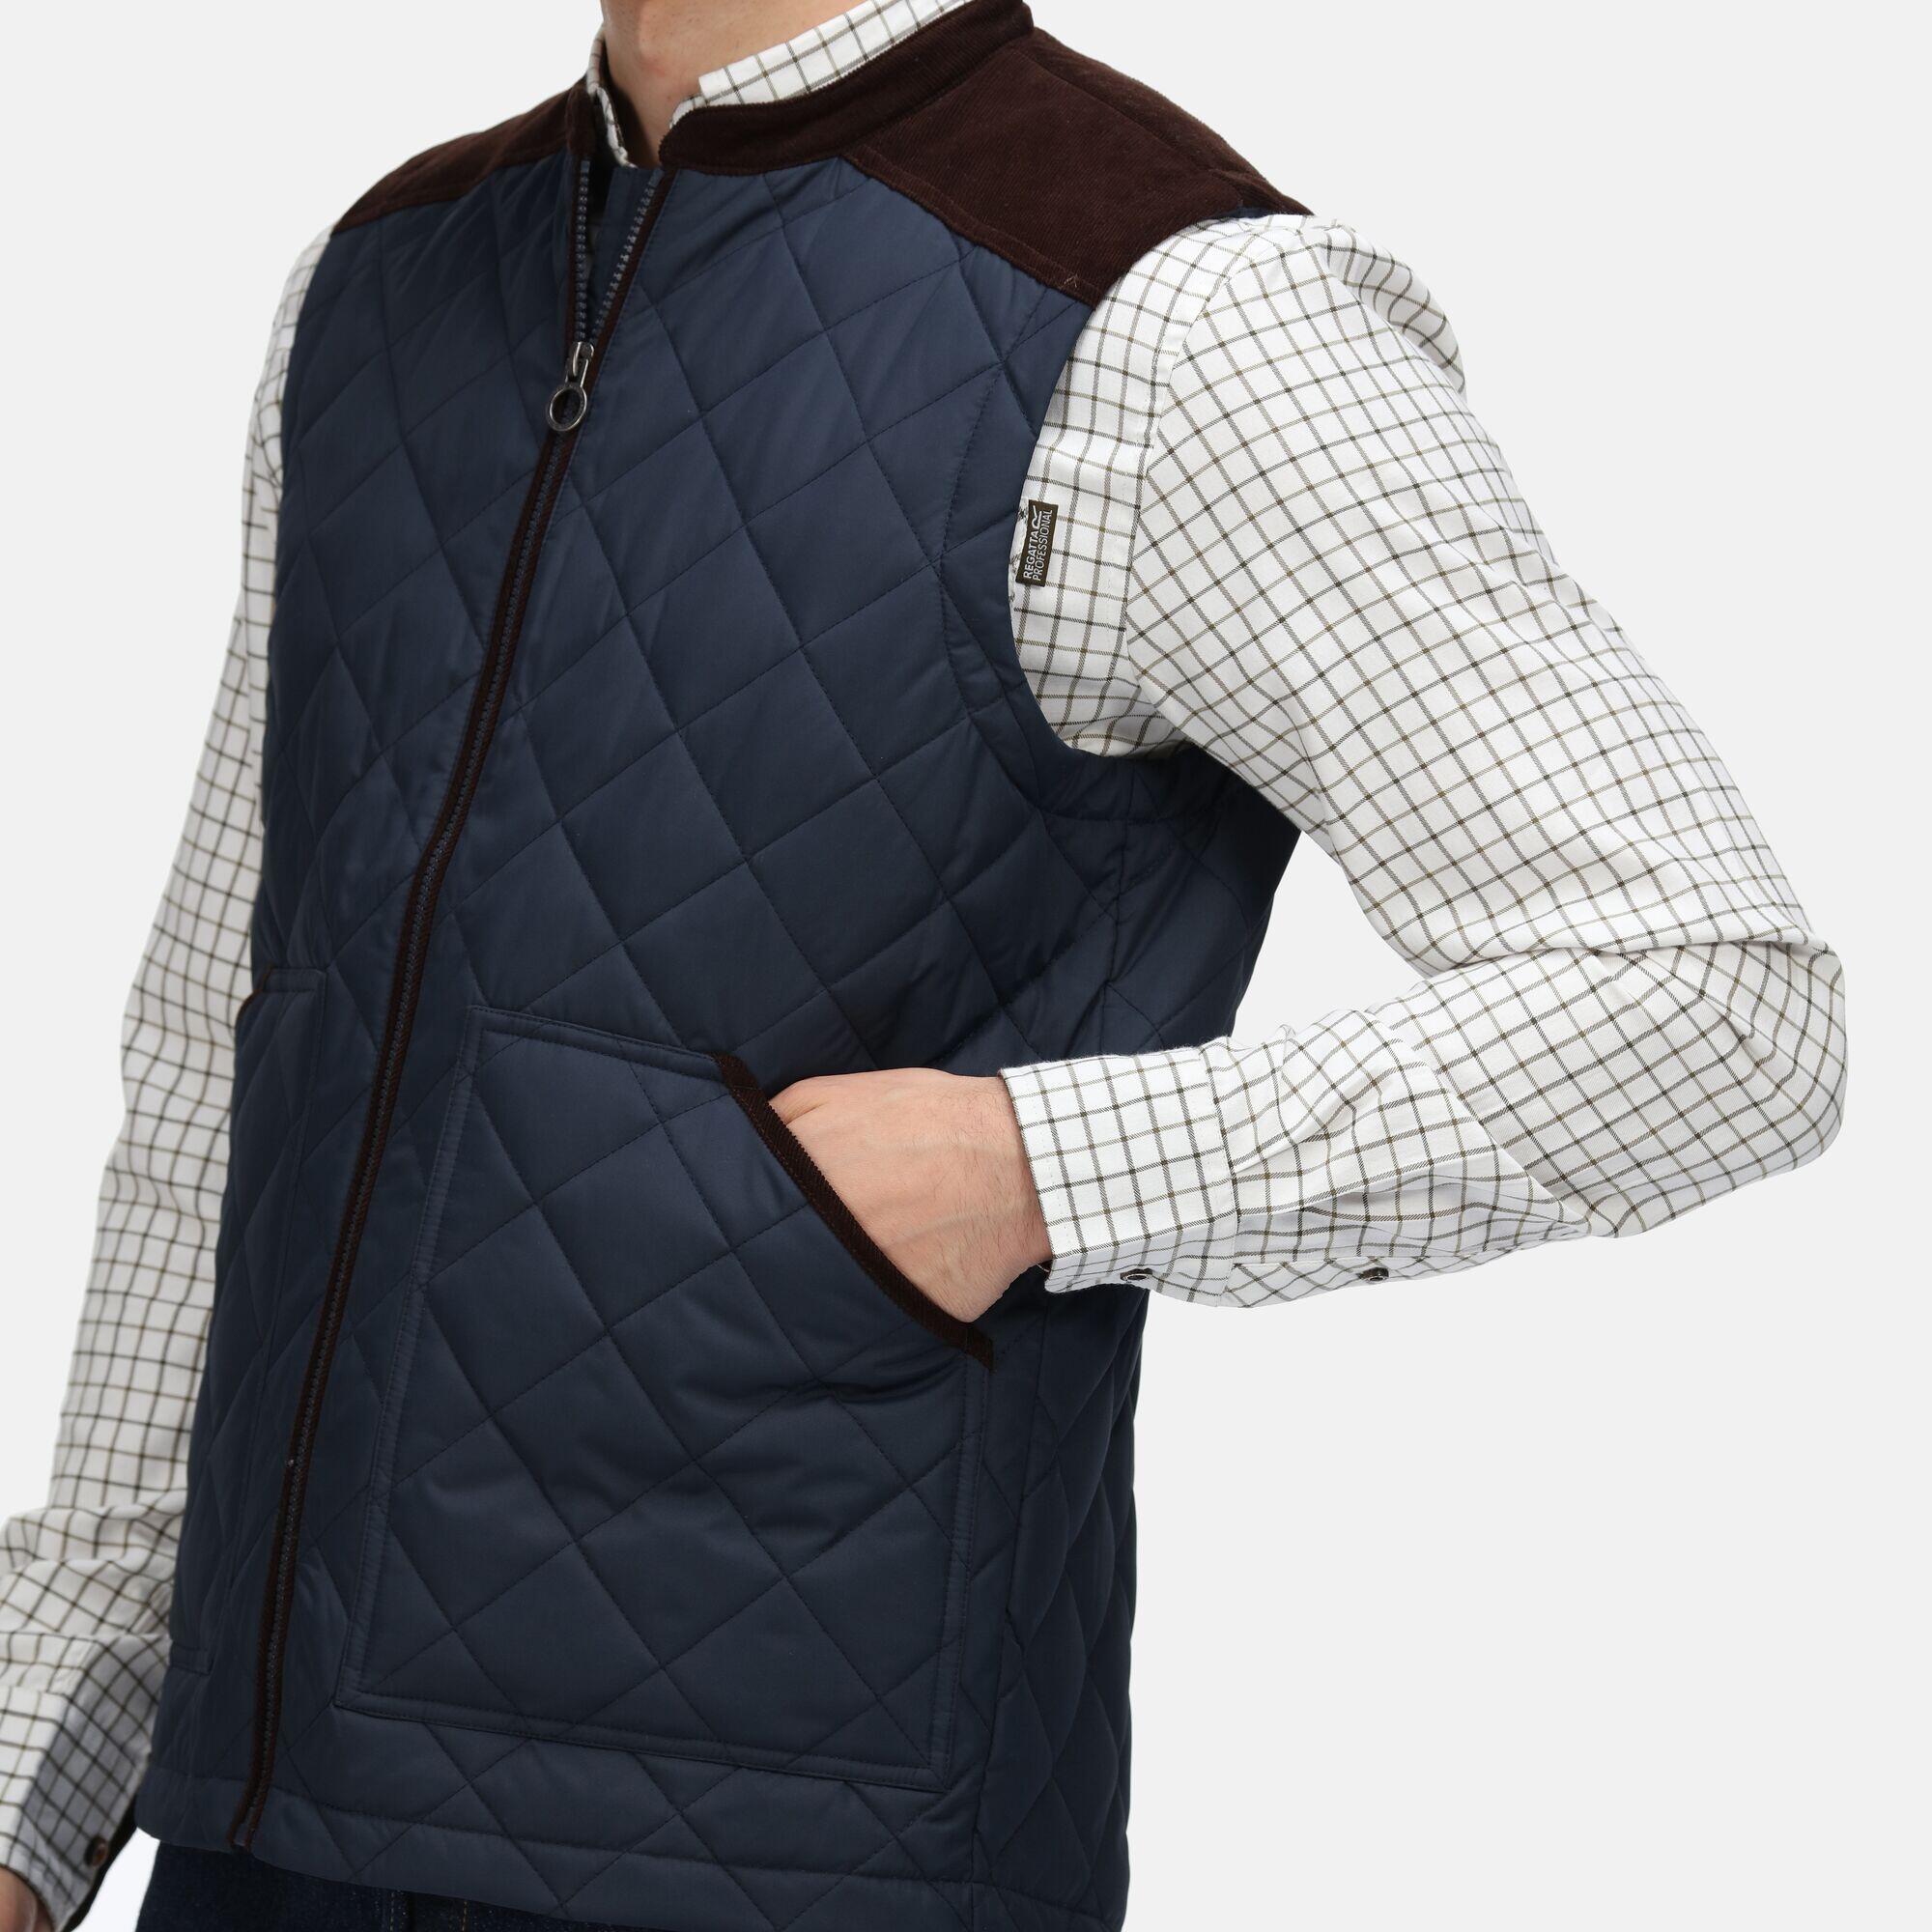 Mens Moreton Quilted Body Warmer (Navy) 4/5